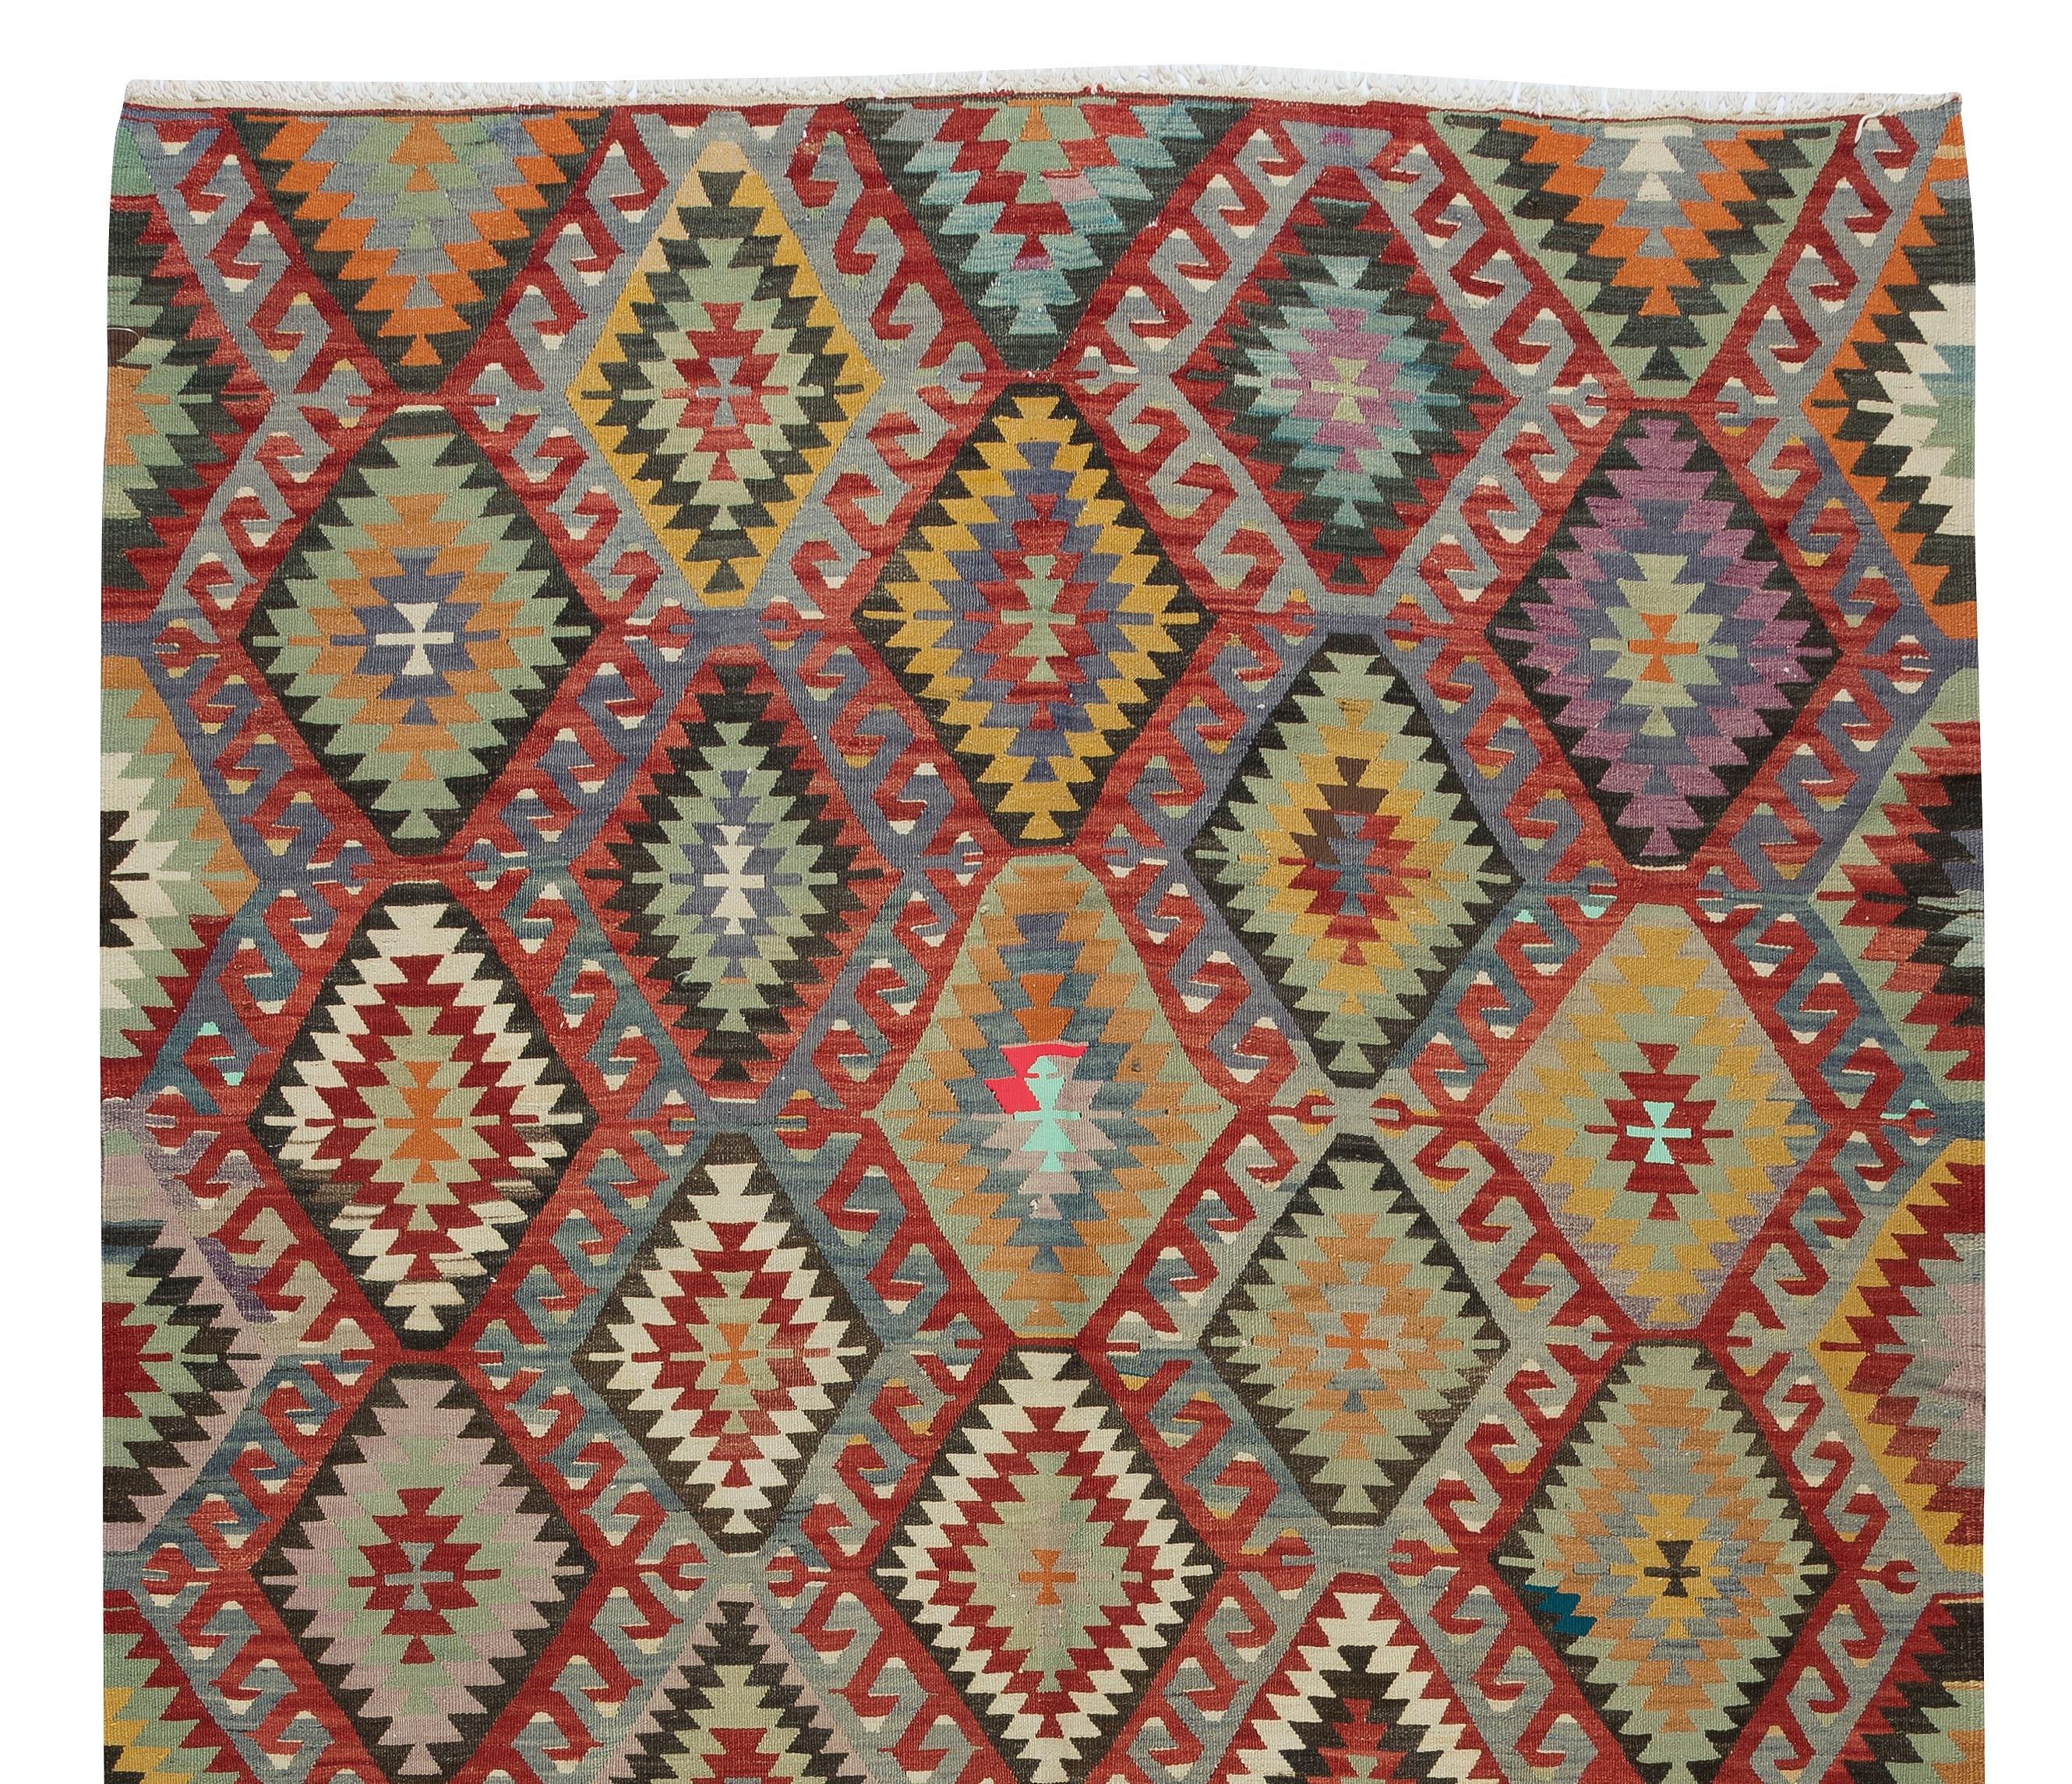 20th Century 5.8x10 Ft One of a Kind Handmade Turkish Wool Kilim, Multicolored Flat-Weave Rug For Sale